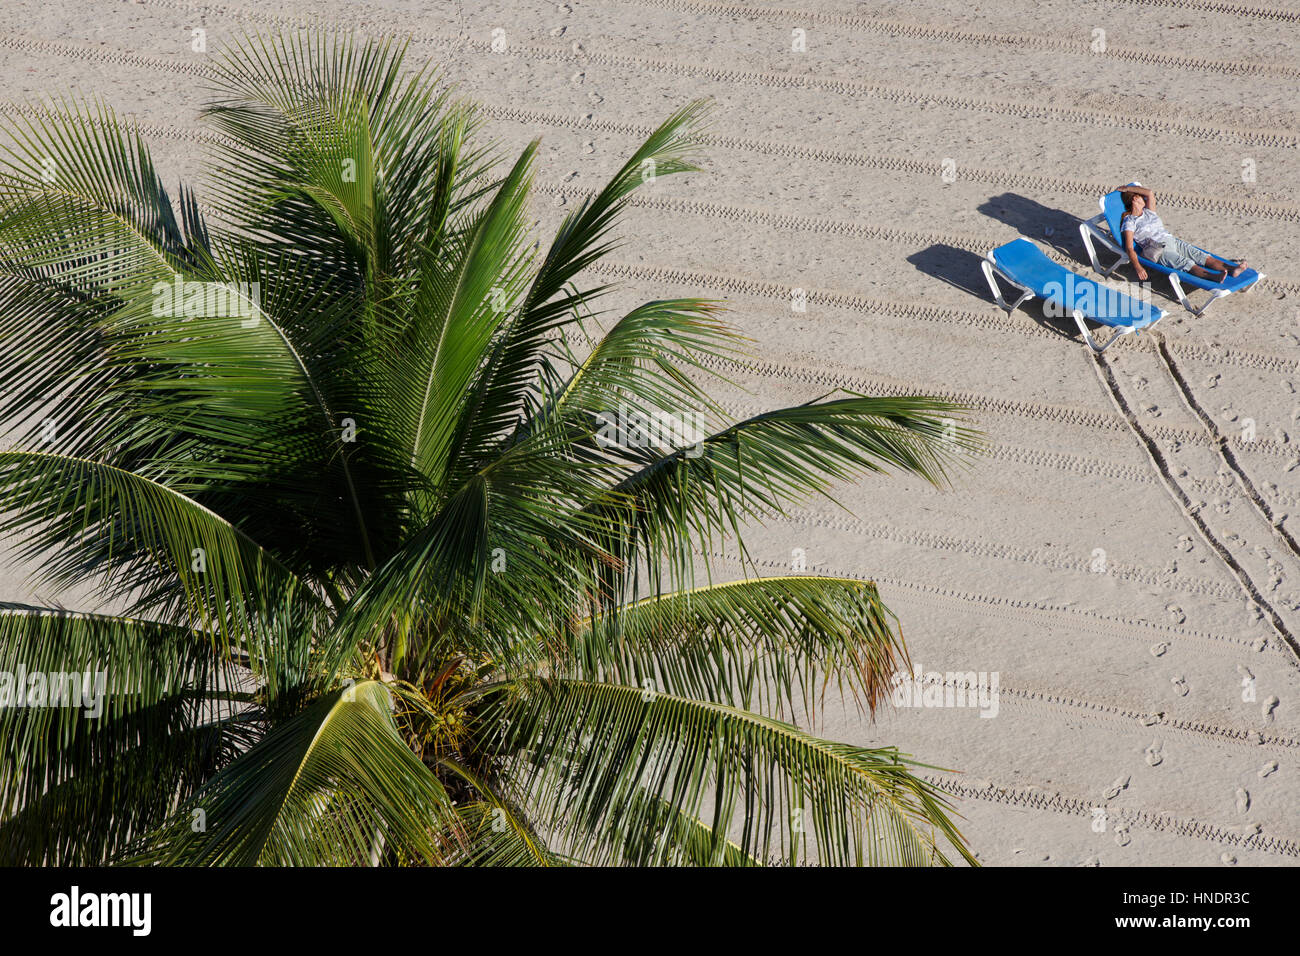 Elevated view of a person on a tropical Isla Verde beach on a chaise lounge,  Carolina, San Juan, Puerto Rico Stock Photo